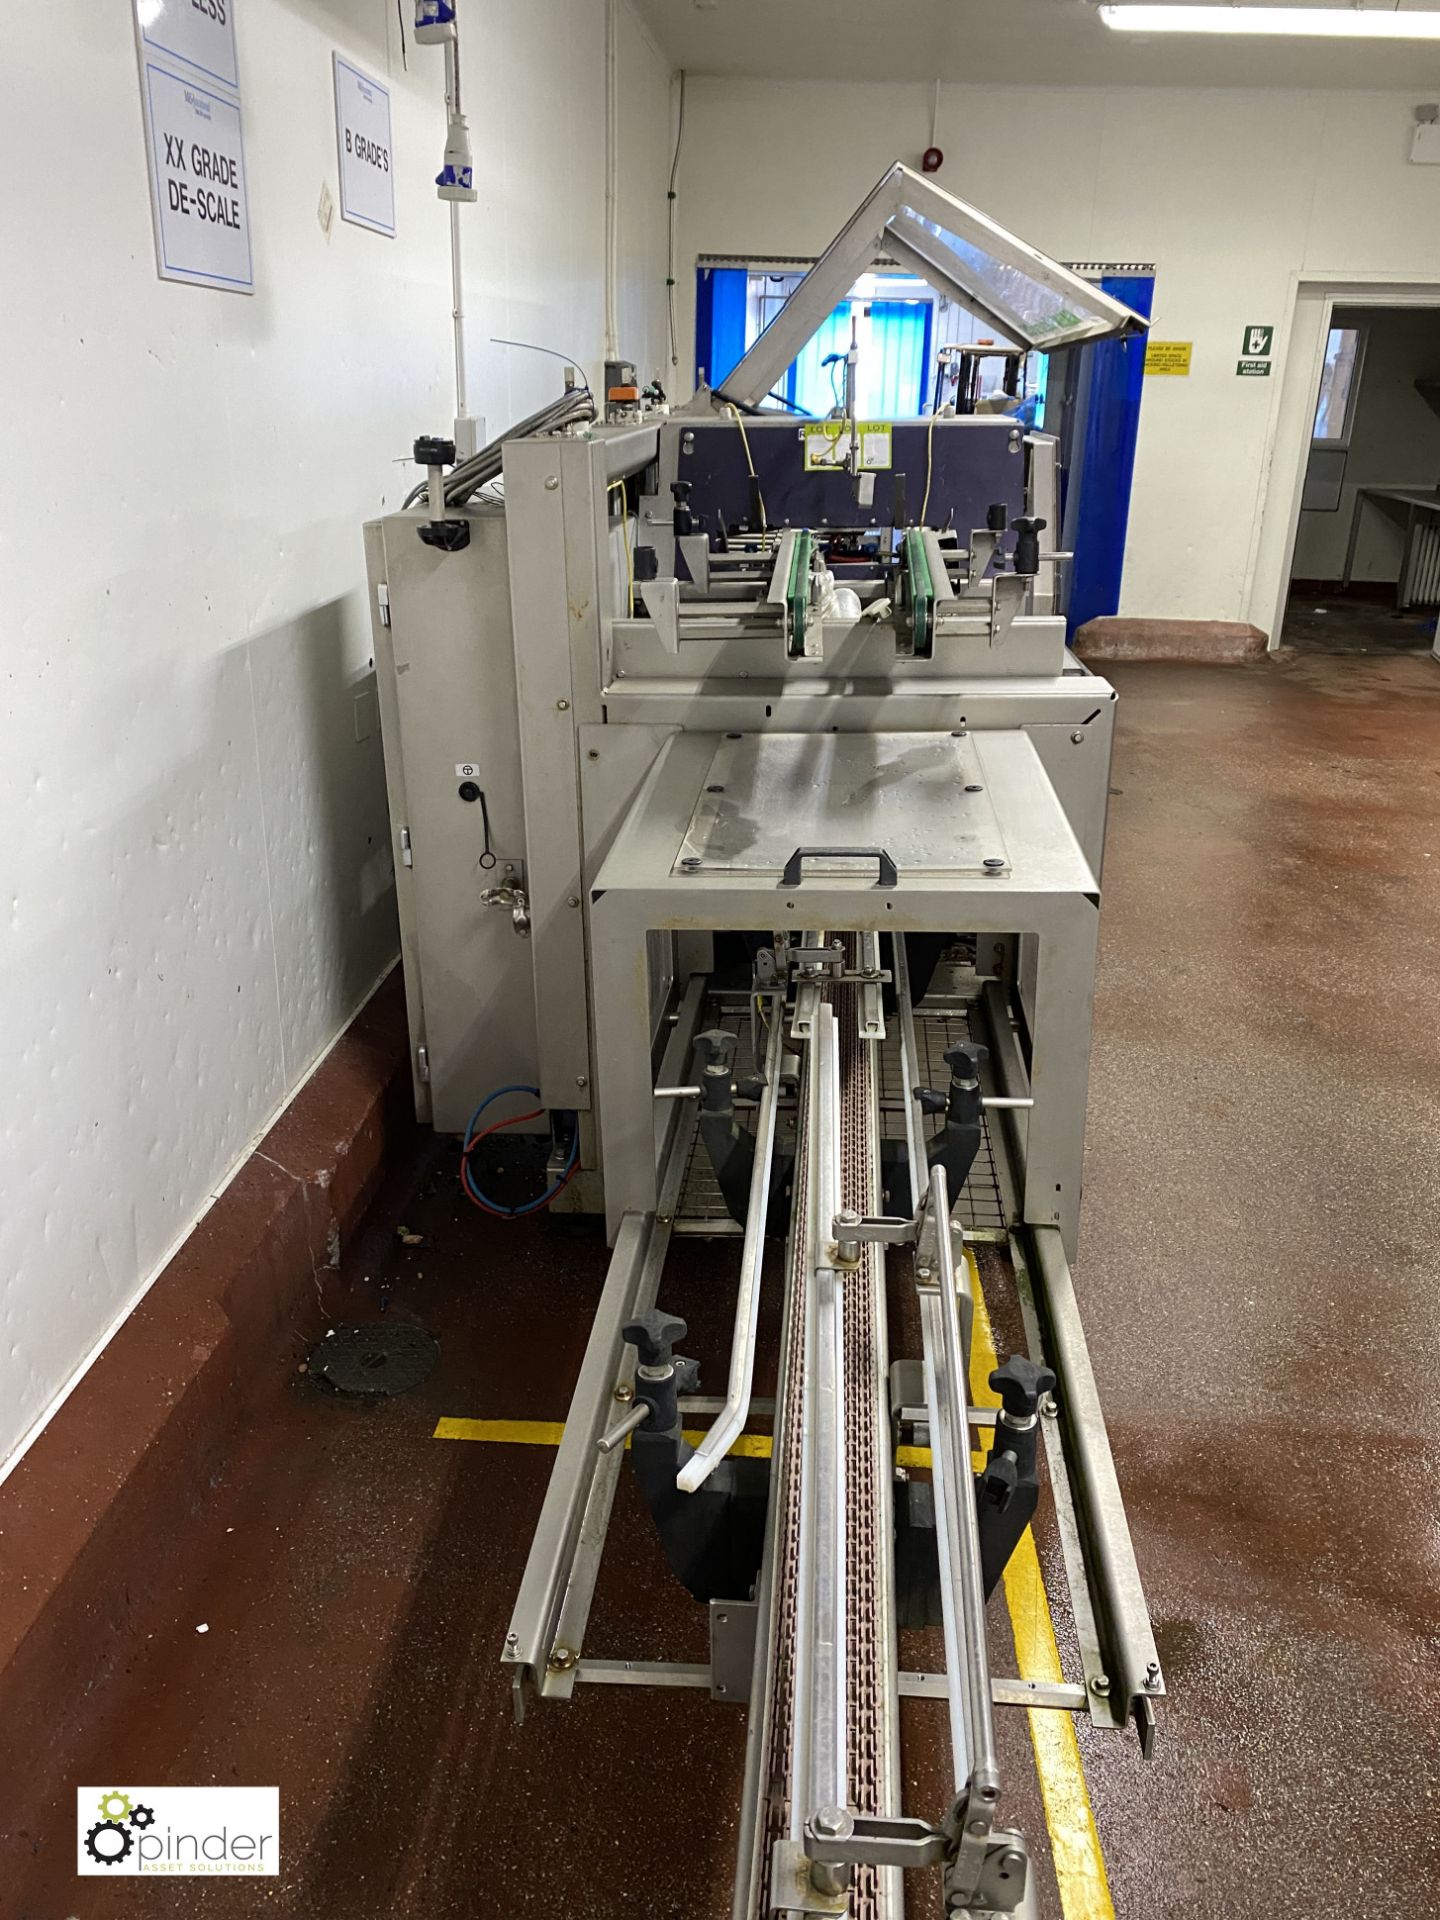 Kliklok Centriwap C150 Cartoning Machine - this machine has been used for collating and sleeving/ - Image 19 of 20